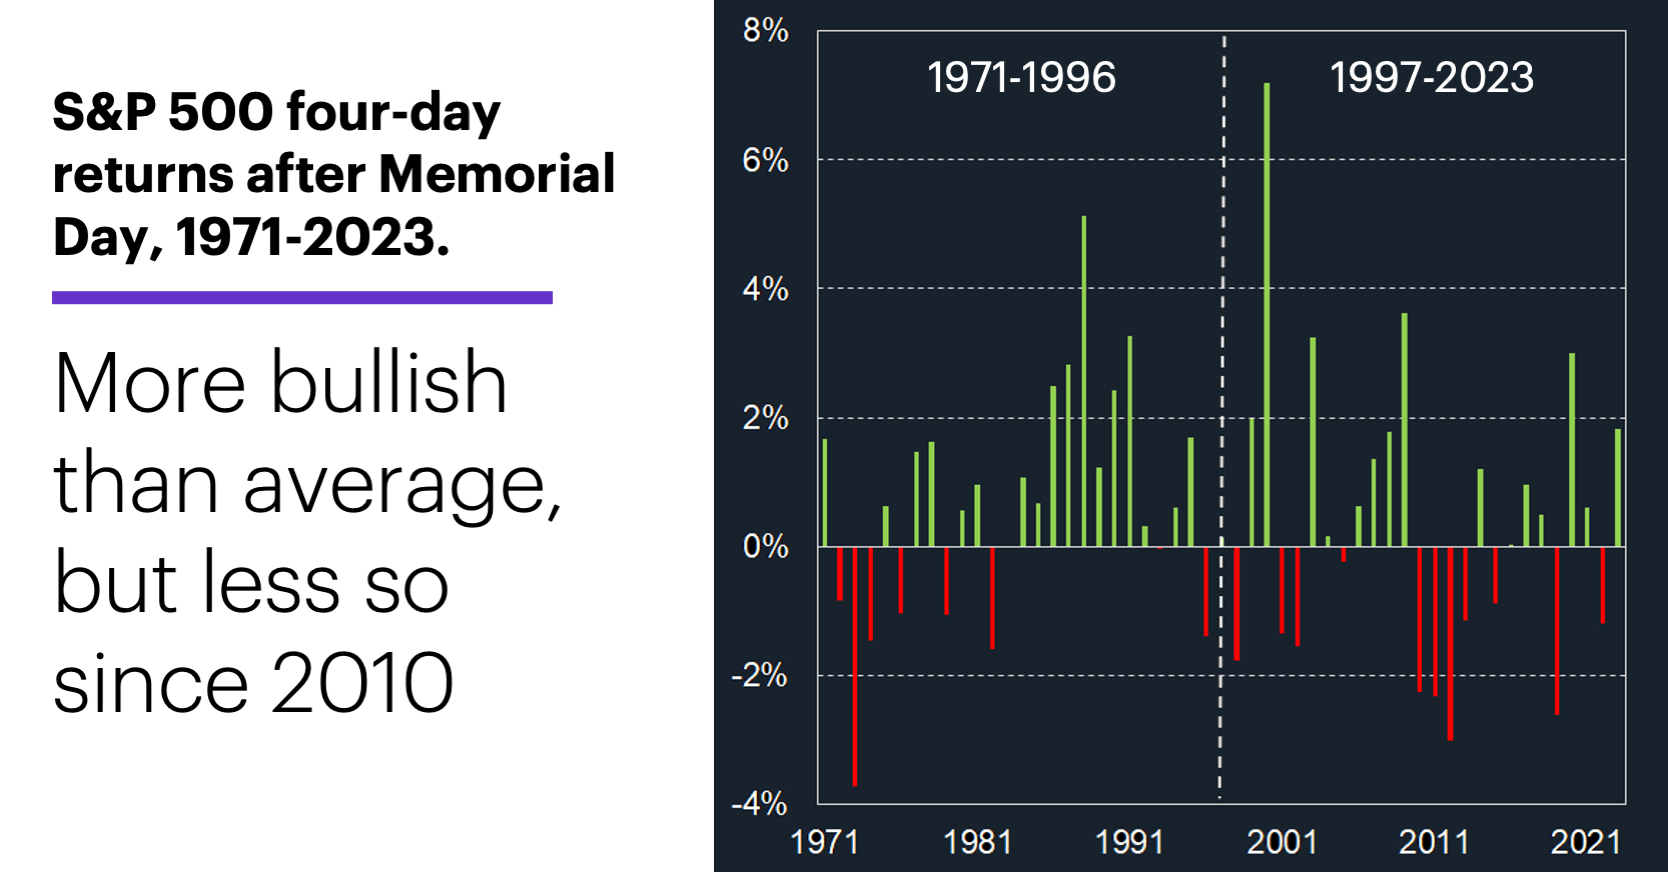 Chart 3: S&P 500 four-day returns after Memorial Day, 1971-2023